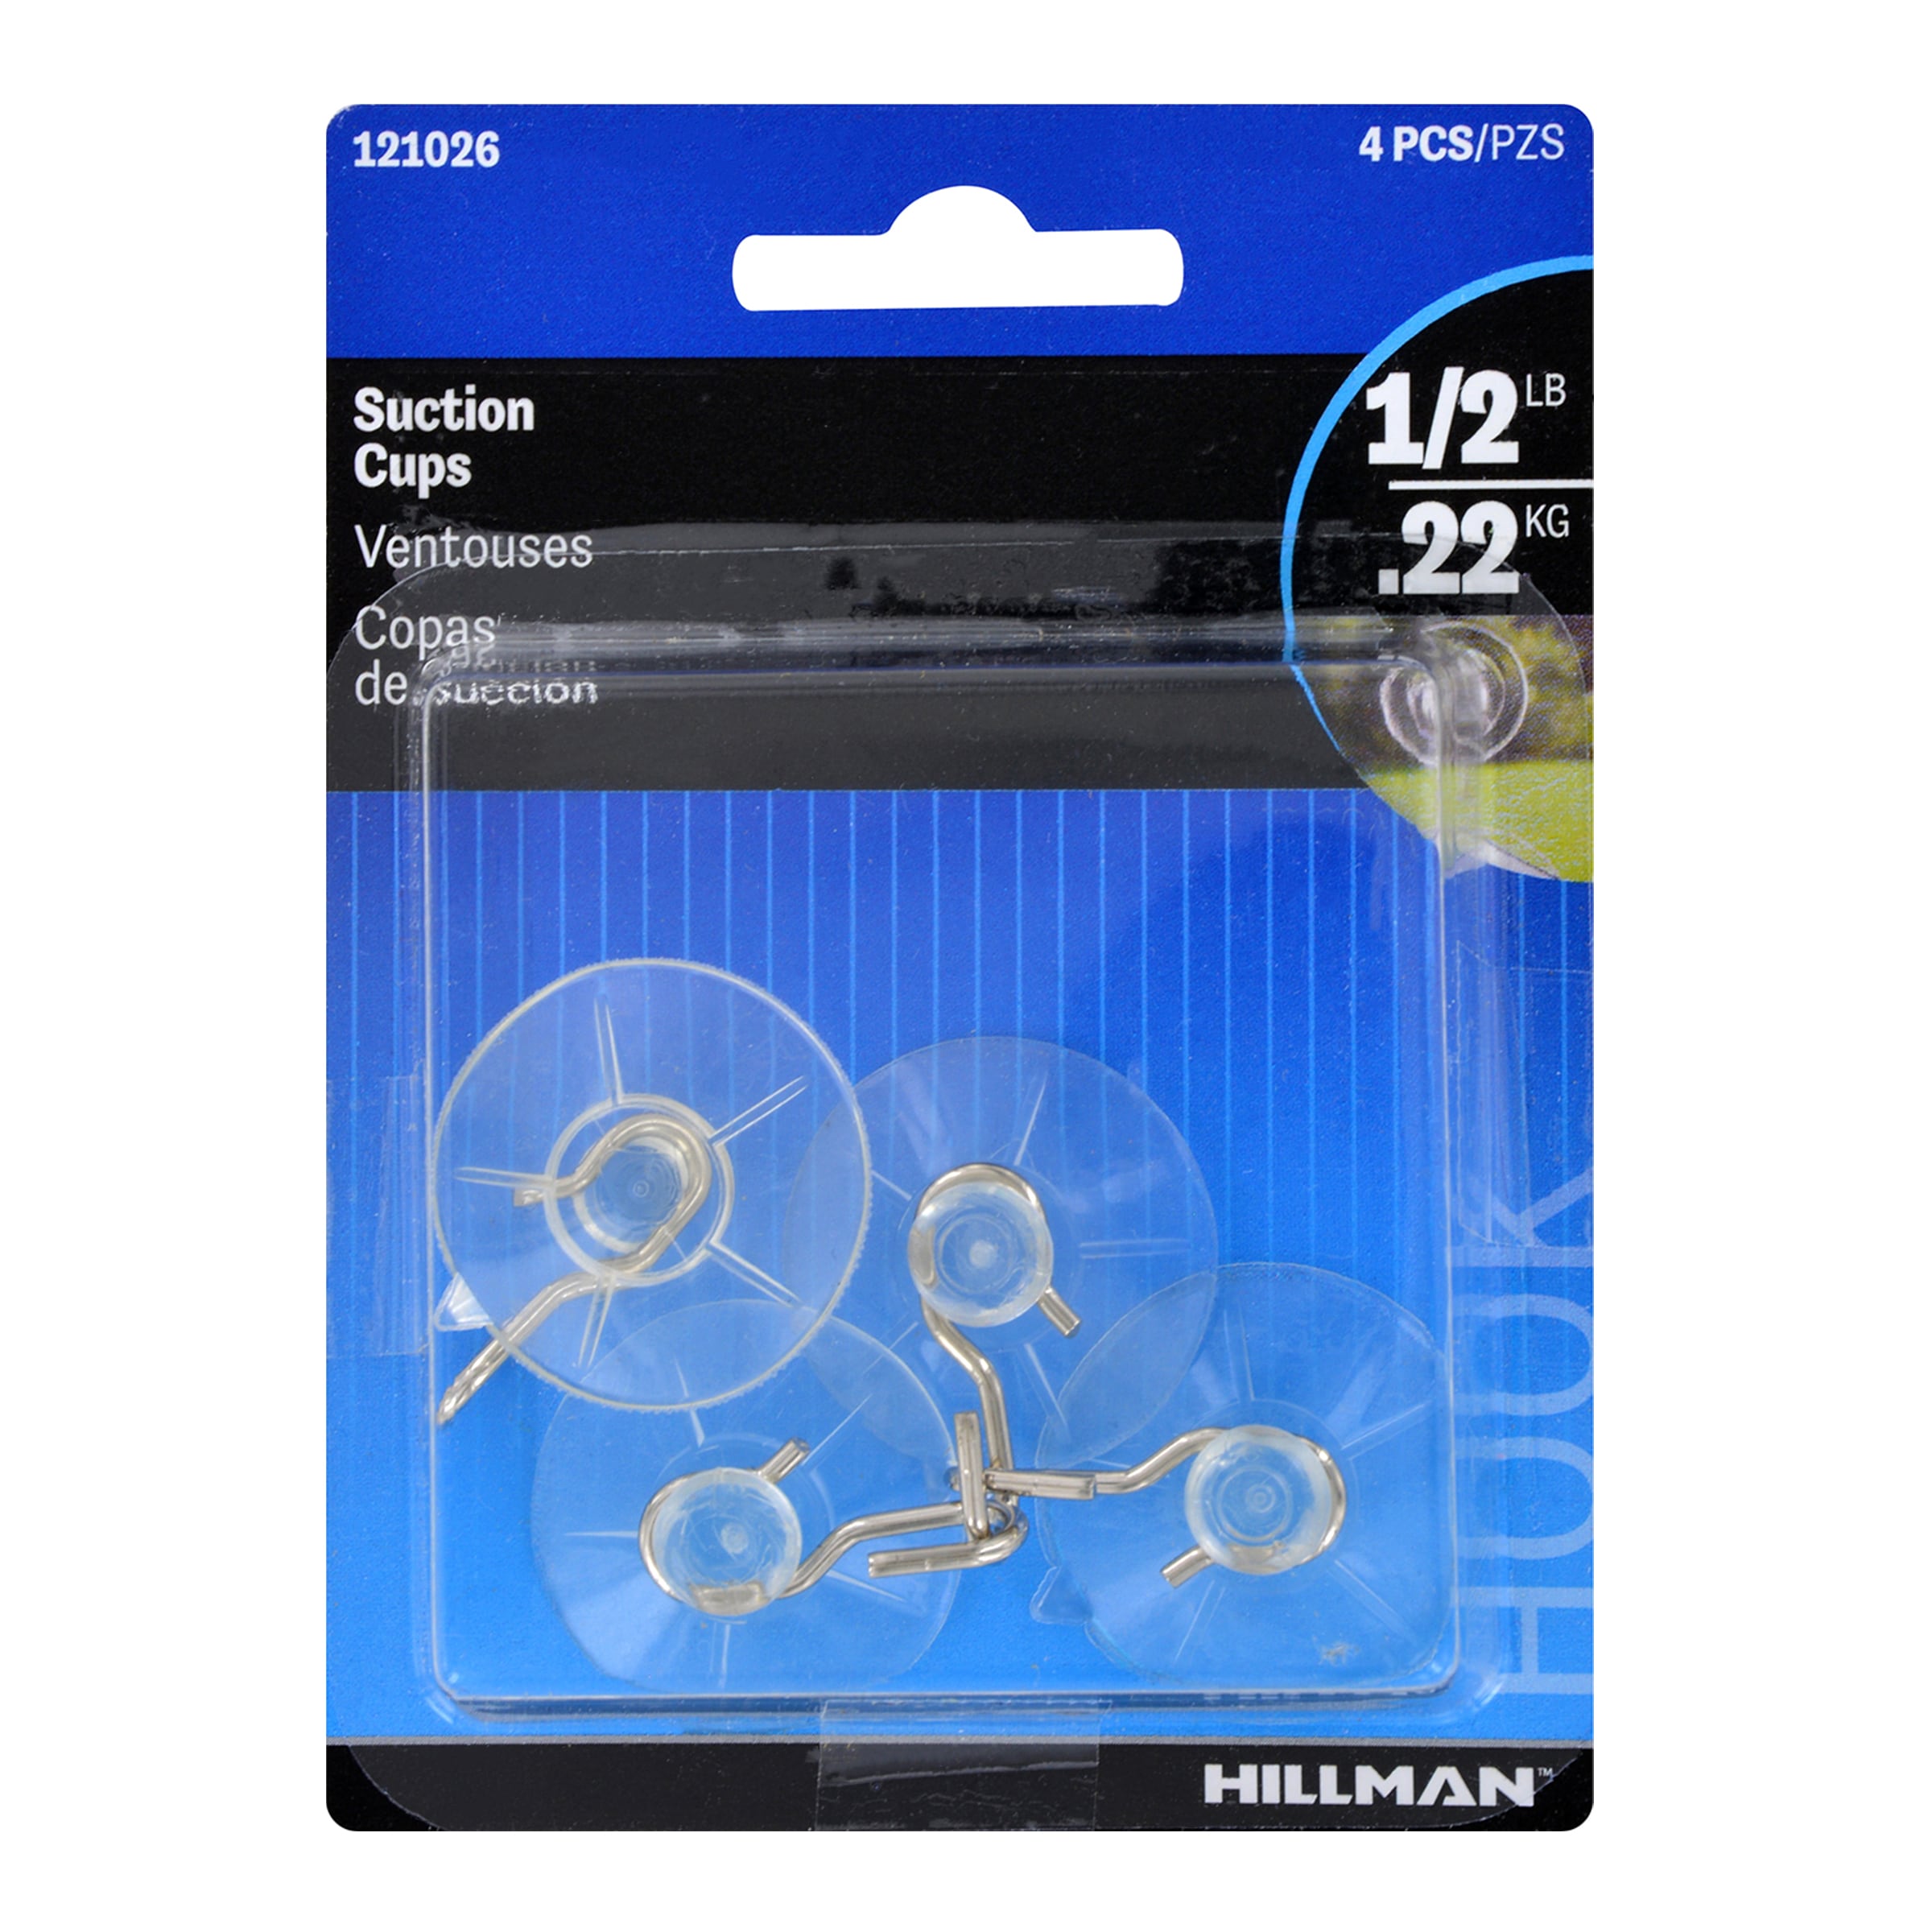 Hillman Small Suction Cup Hooks, 1 lb, 4 Pieces